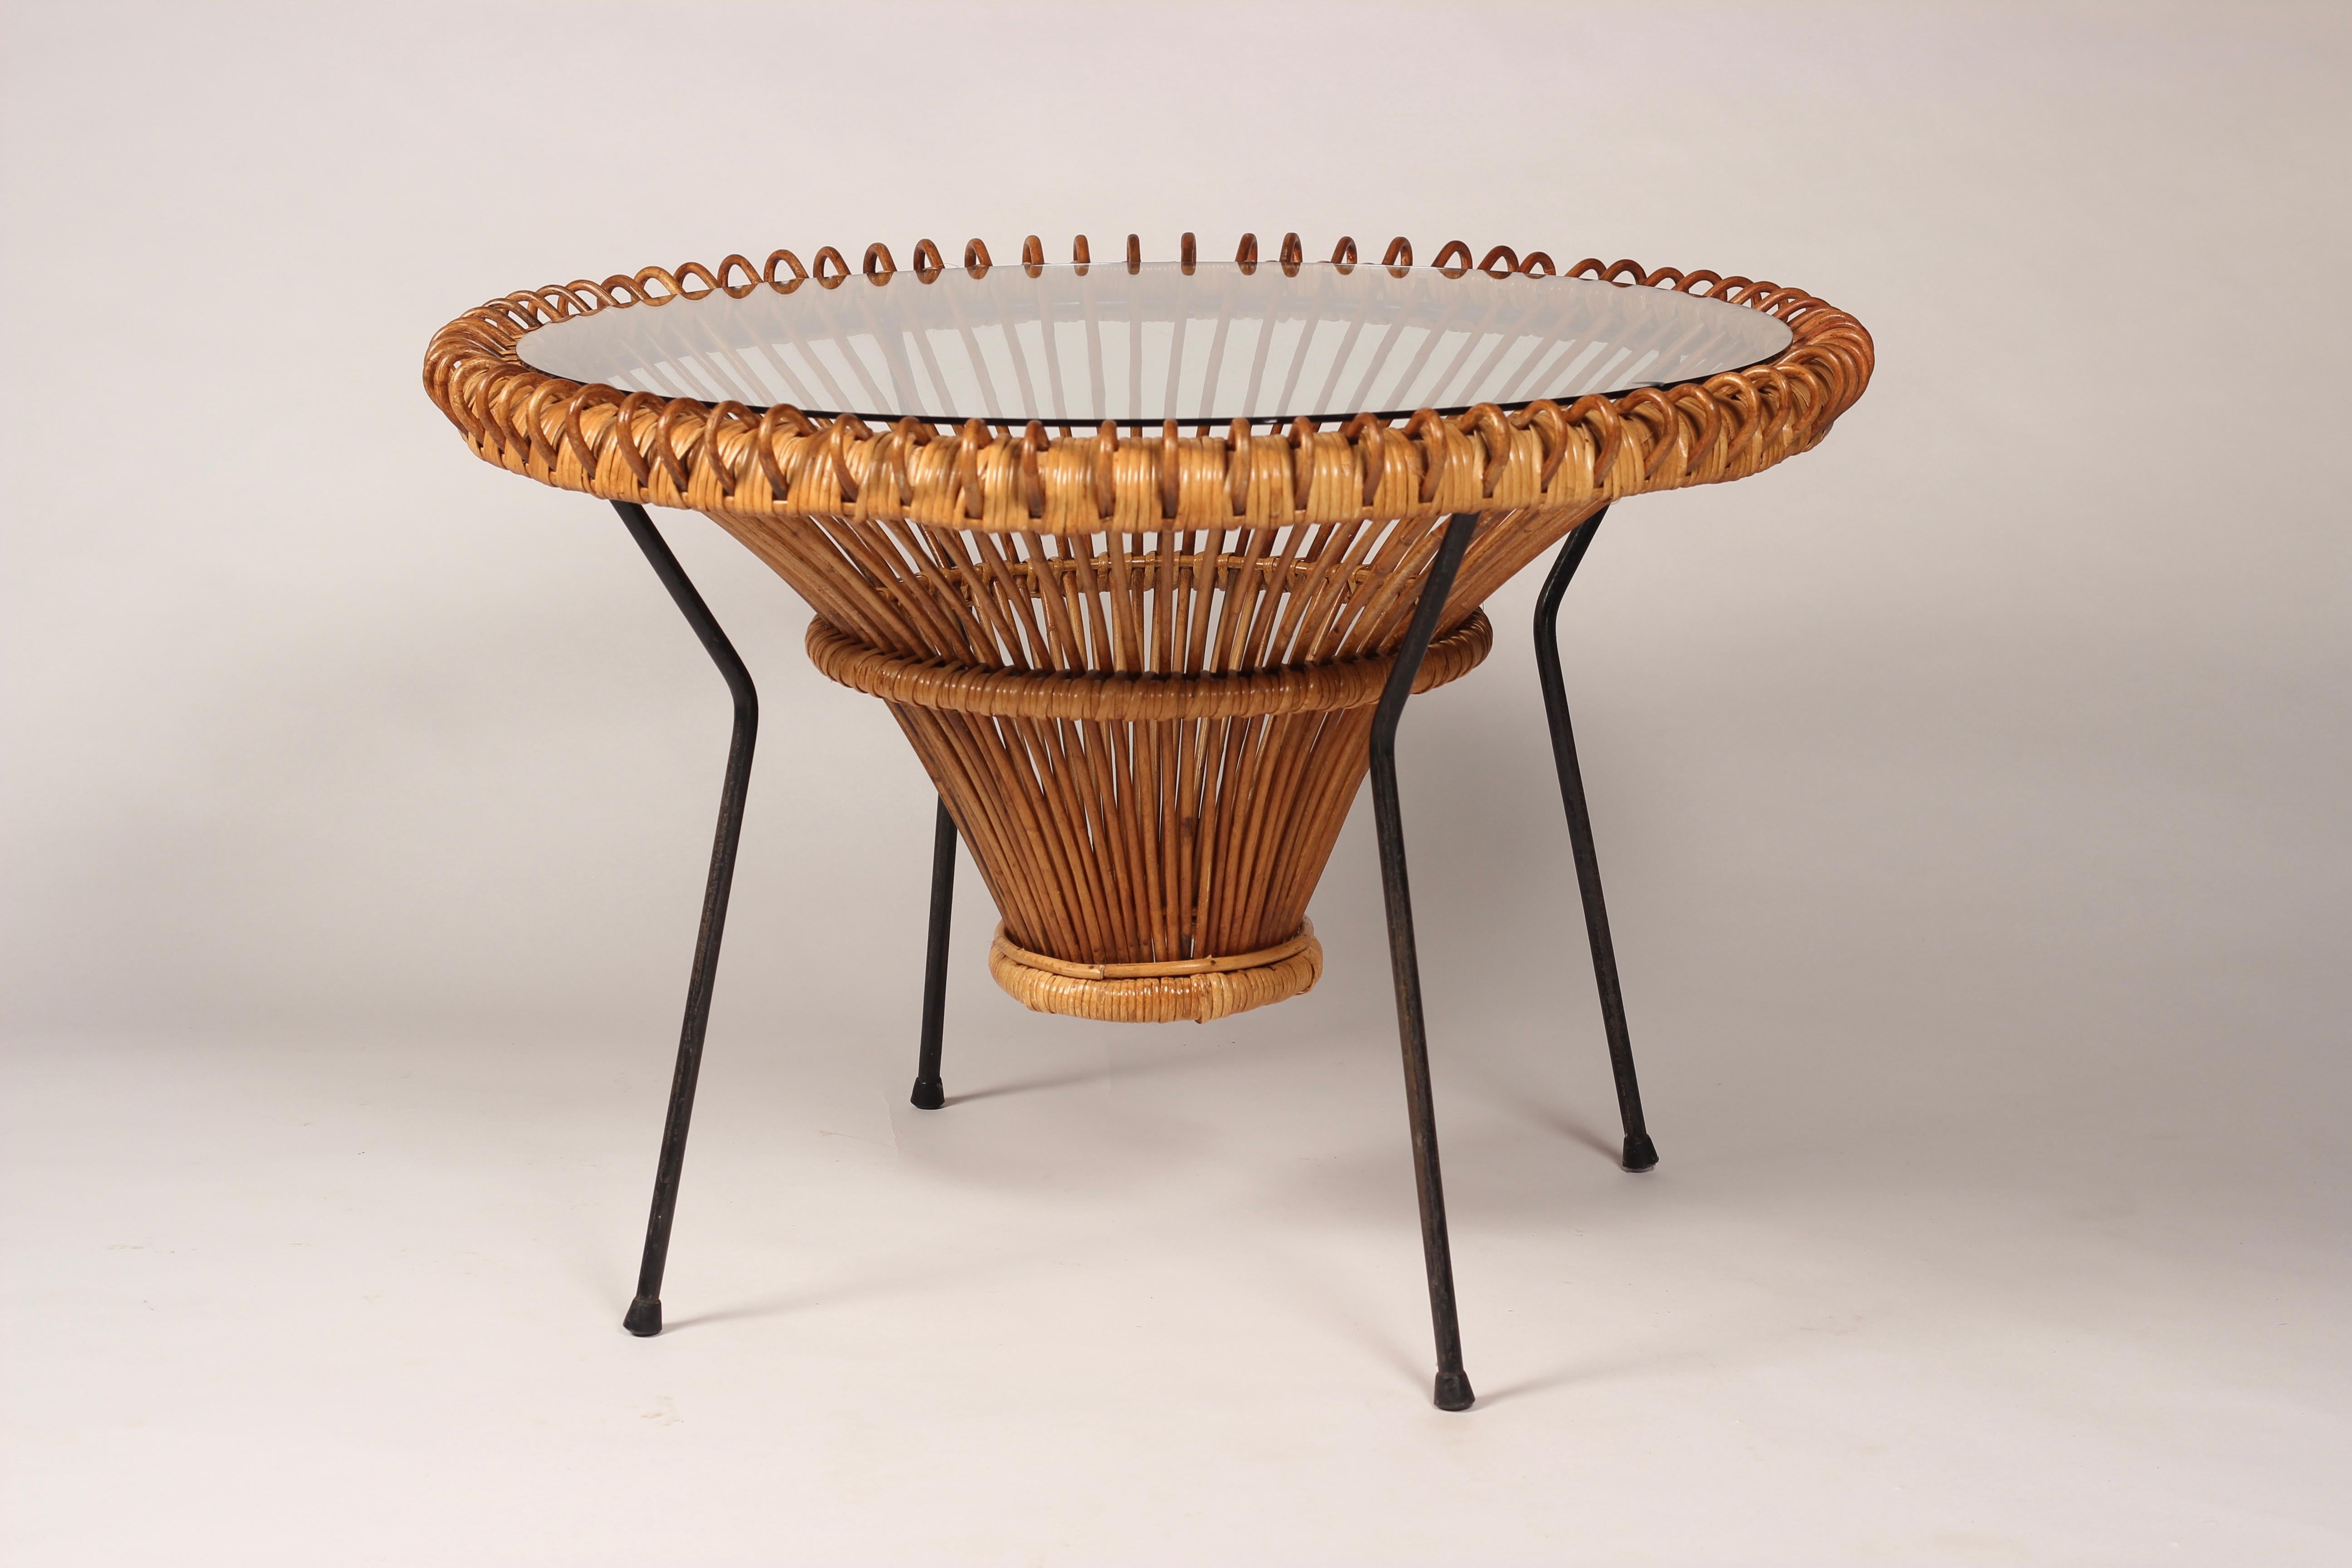 A good example of a Mid-Century Modern side table/coffee table in the style of Franco Albini

A 1950’s wicker rattan table, which has a visual lightness of structure and weight. It works particularly well in not filling a space with solid volume,